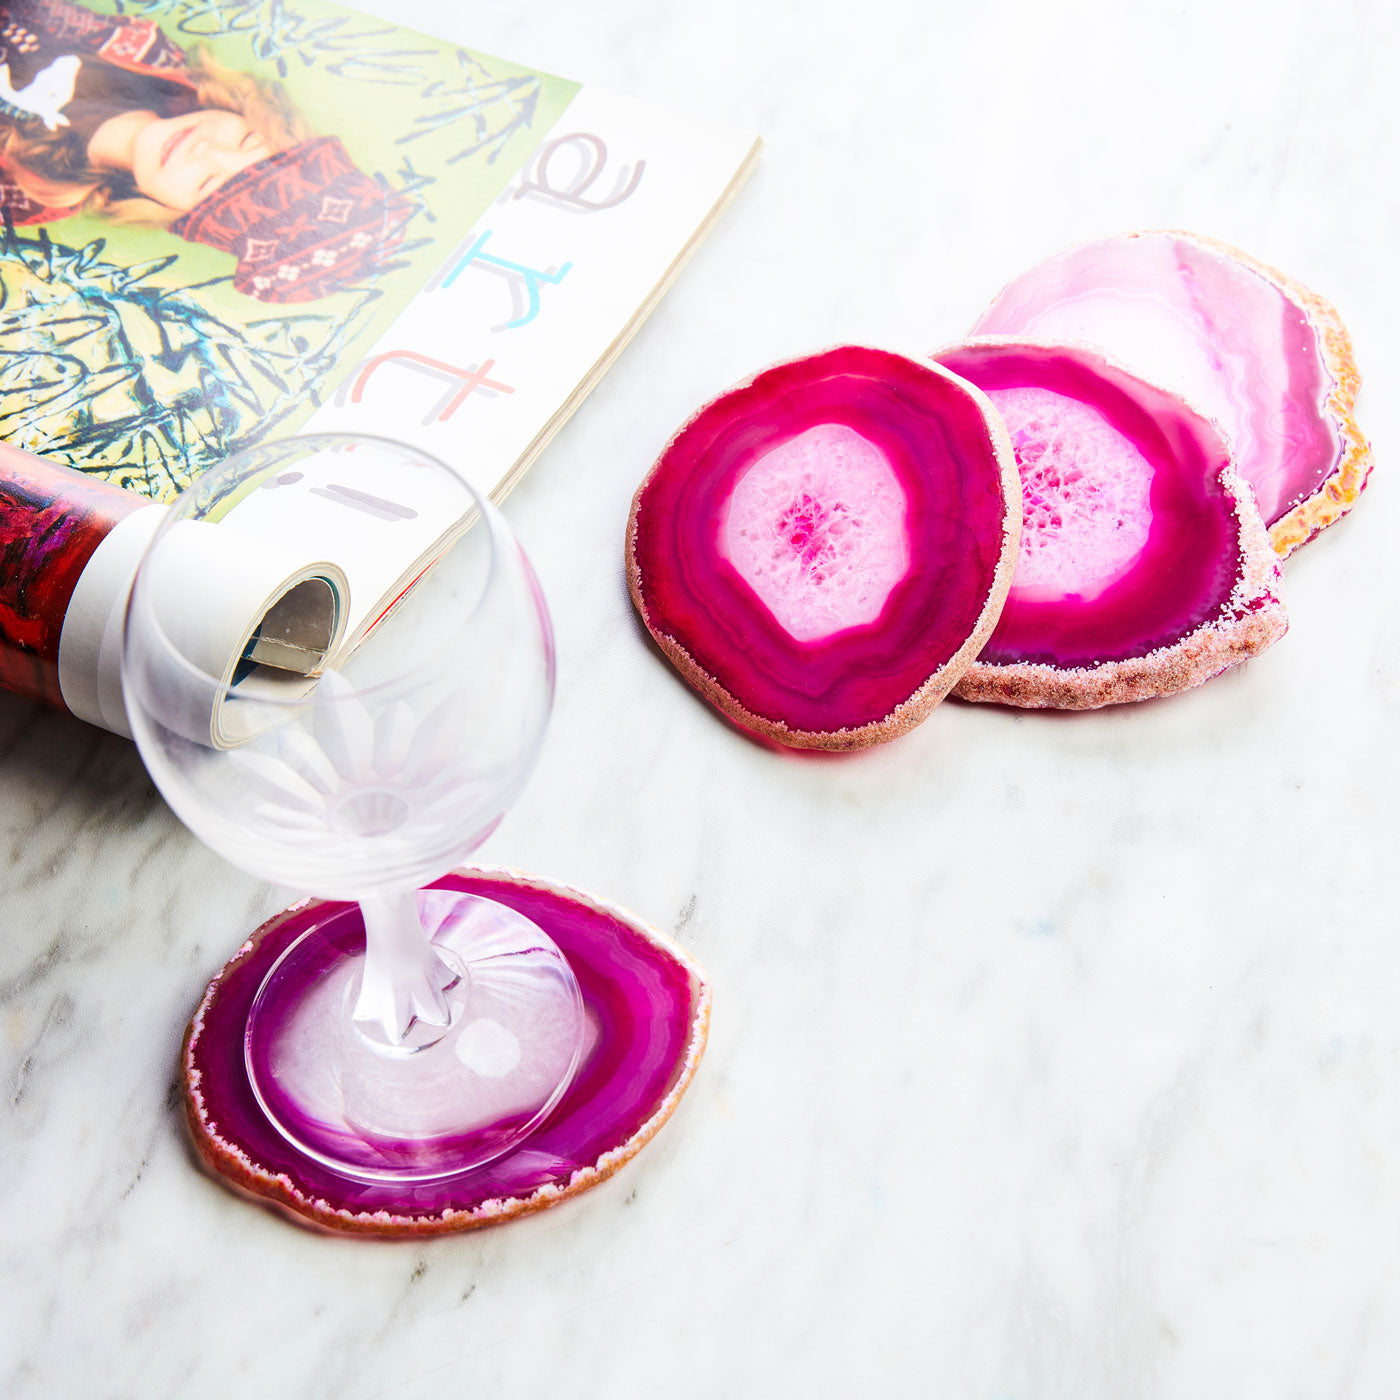 Set of 4 Natural Brazilian Agate Drink Coasters with Wood Holder - Rose Pink